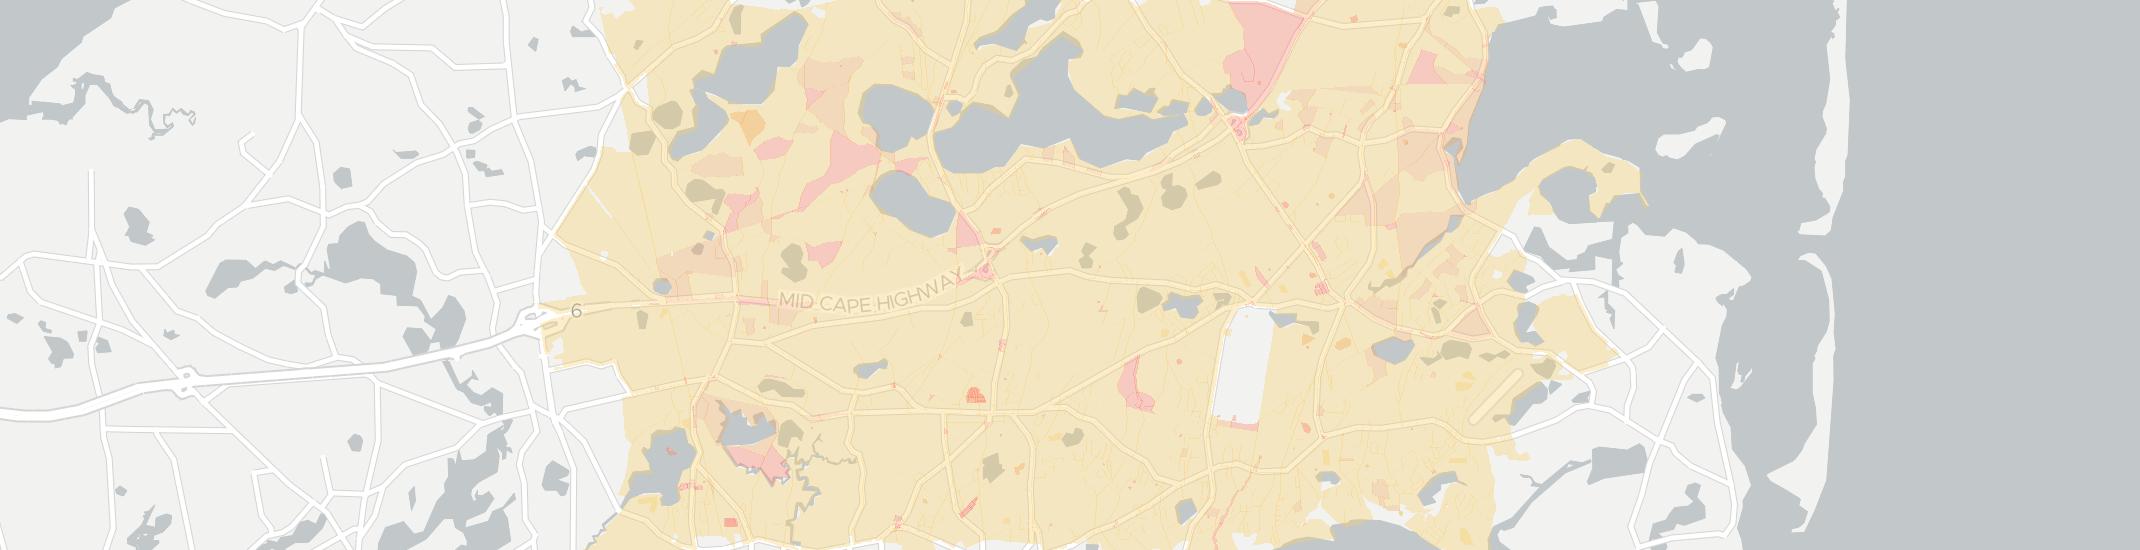 Harwich Internet Competition Map. Click for interactive map.